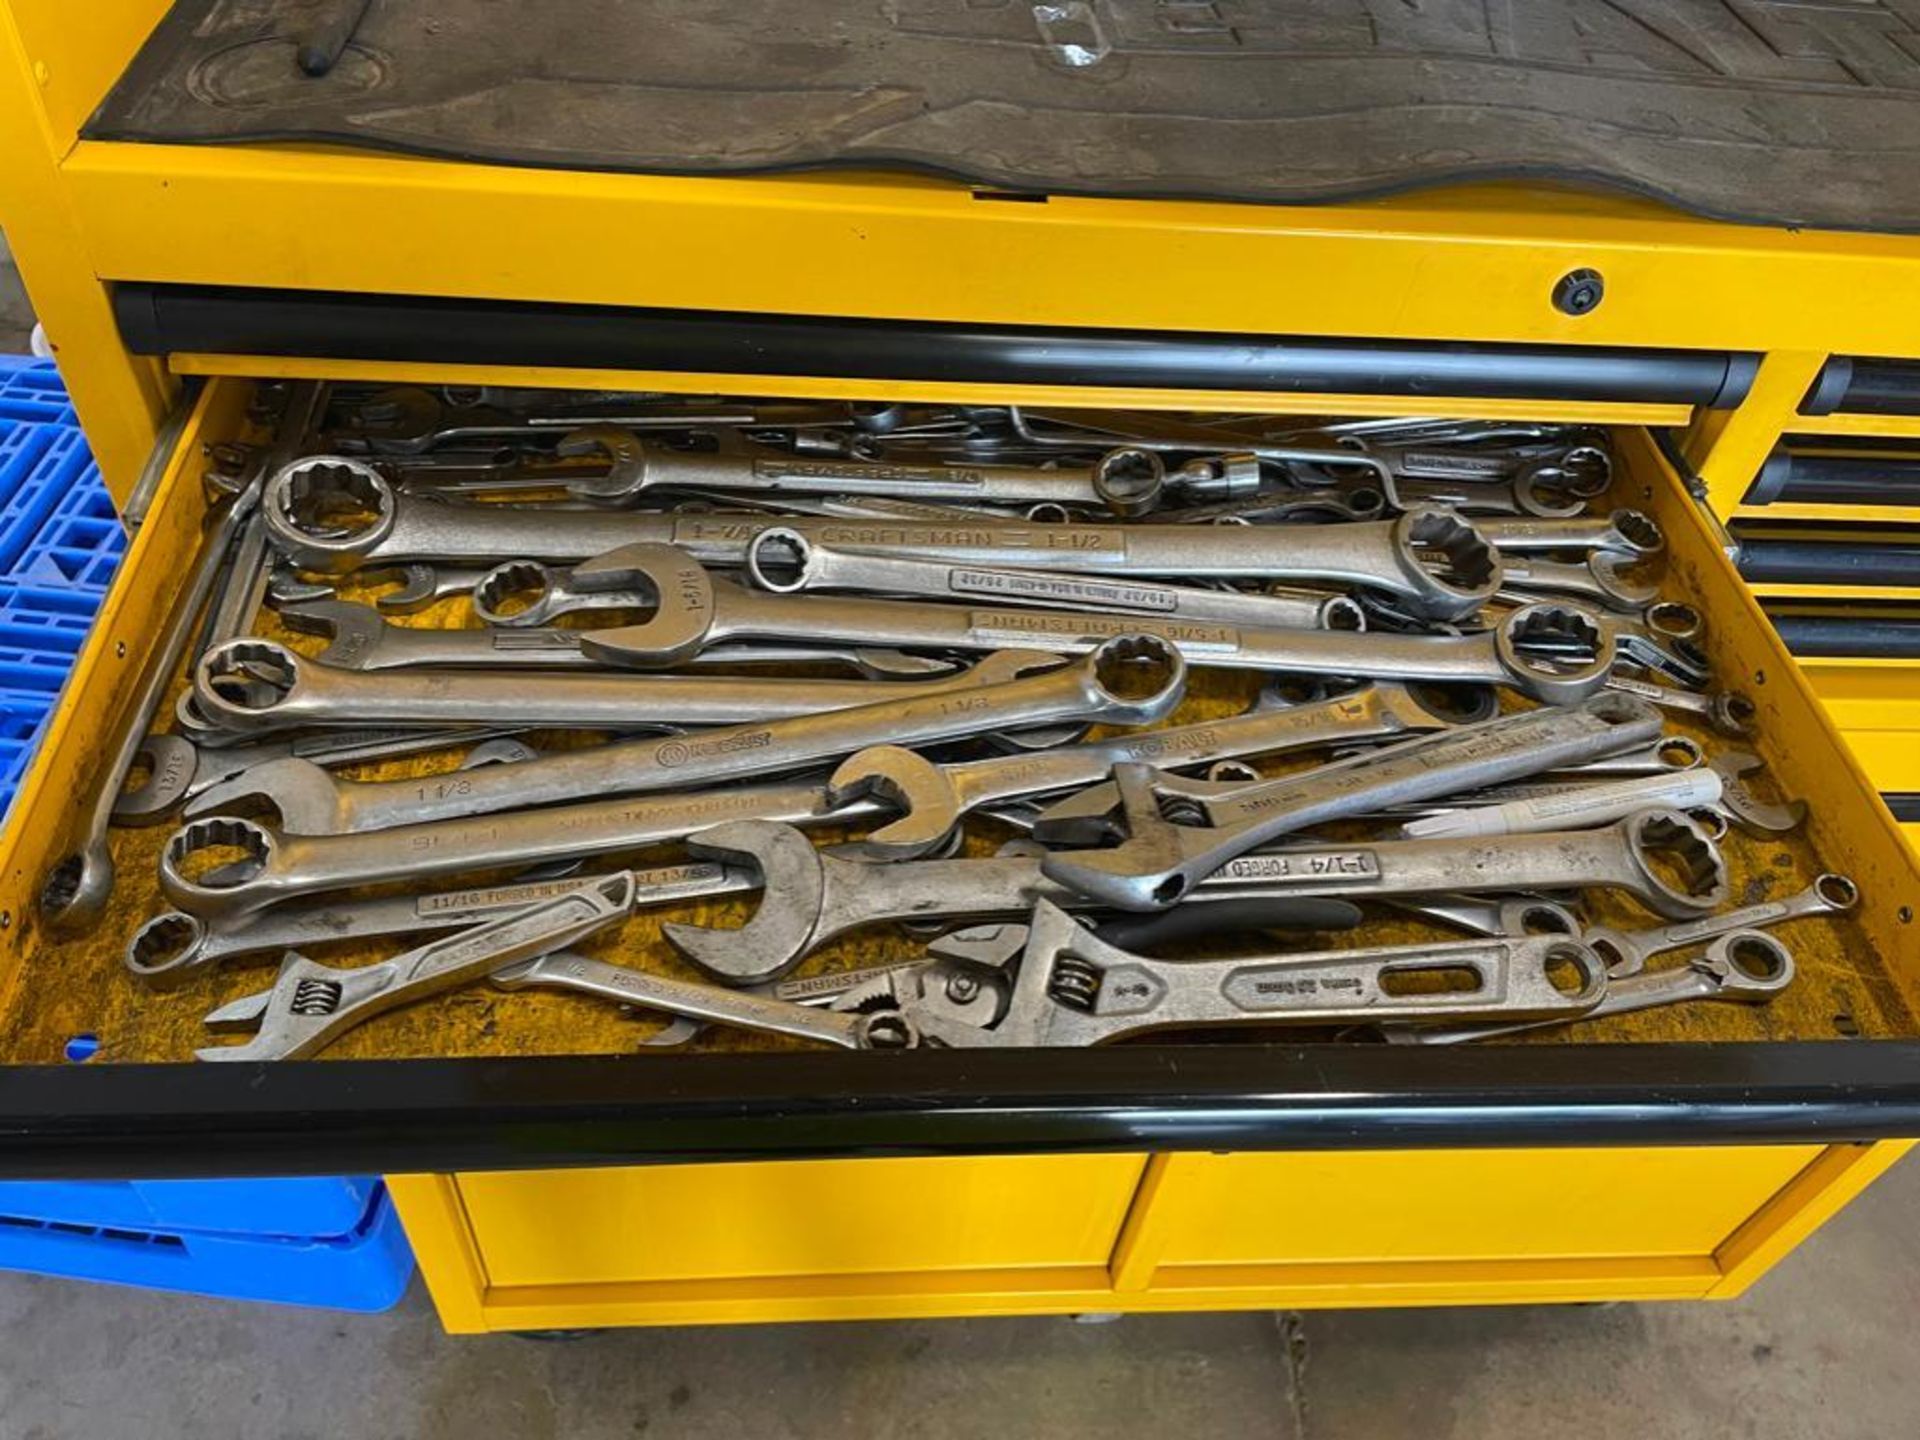 DeWalt Mechanics Tool Box with Contents, Wrenches, Sockets, Plyers, Pipe Wrench, Screwdrivers, etc. - Image 8 of 24